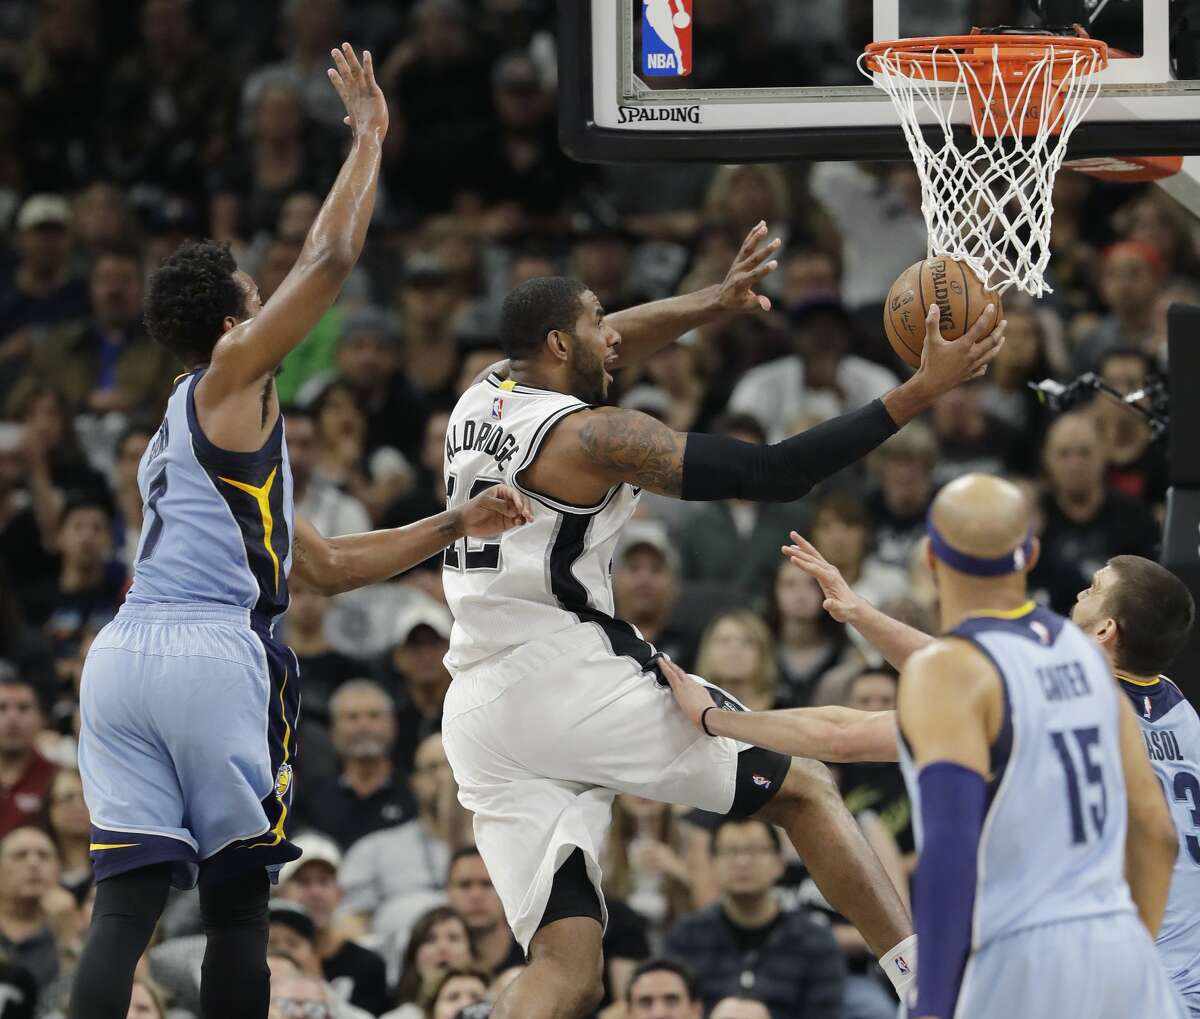 San Antonio Spurs forward LaMarcus Aldridge (12) drives past Memphis Grizzlies guard Wayne Selden (7) during the first half in Game 2 of a first-round NBA basketball playoff series, Monday, April 17, 2017, in San Antonio. (AP Photo/Eric Gay)